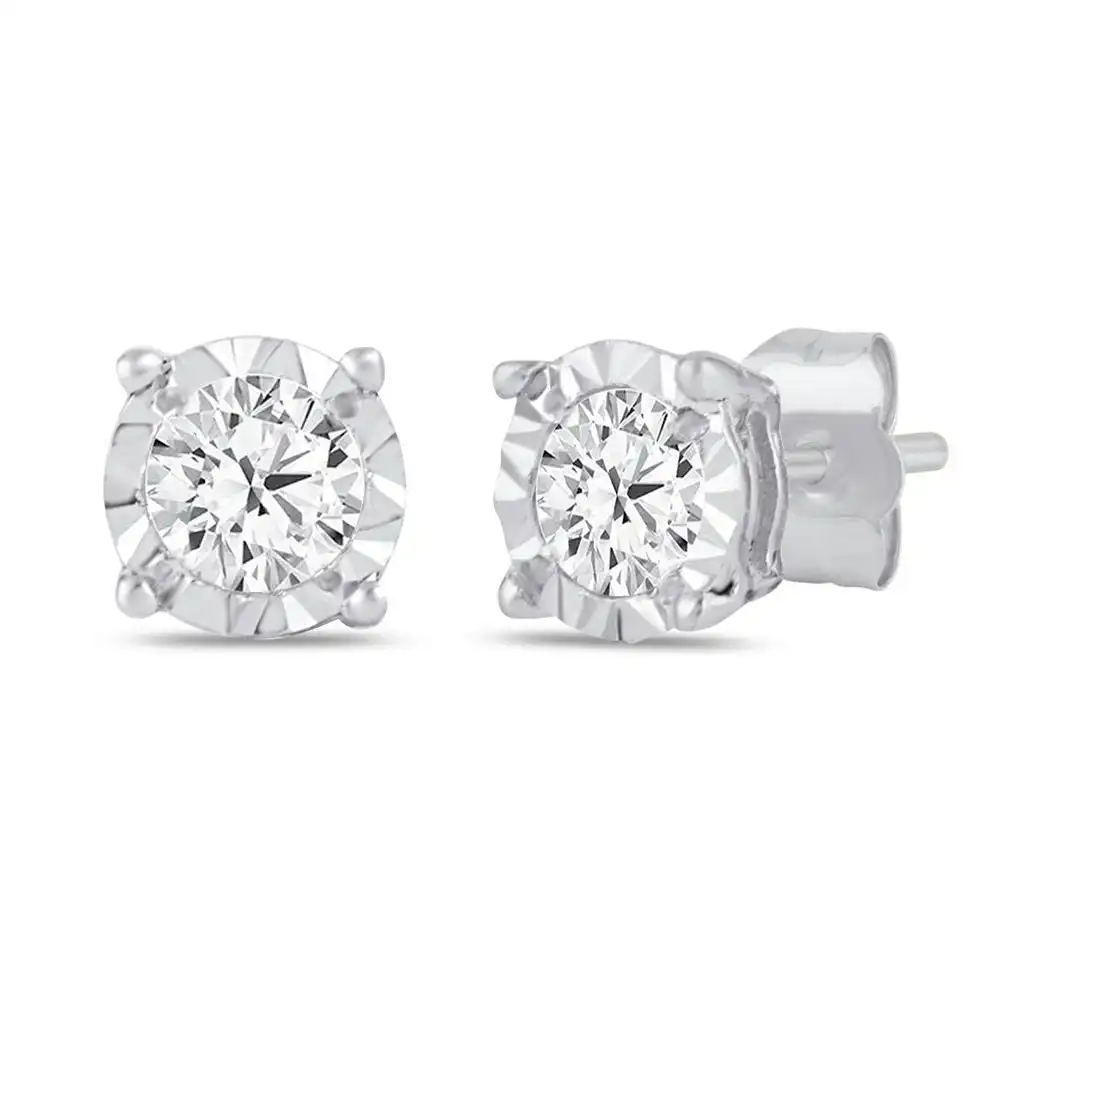 Tia Miracle Halo Earrings with 0.10ct of Diamonds in 9ct White Gold